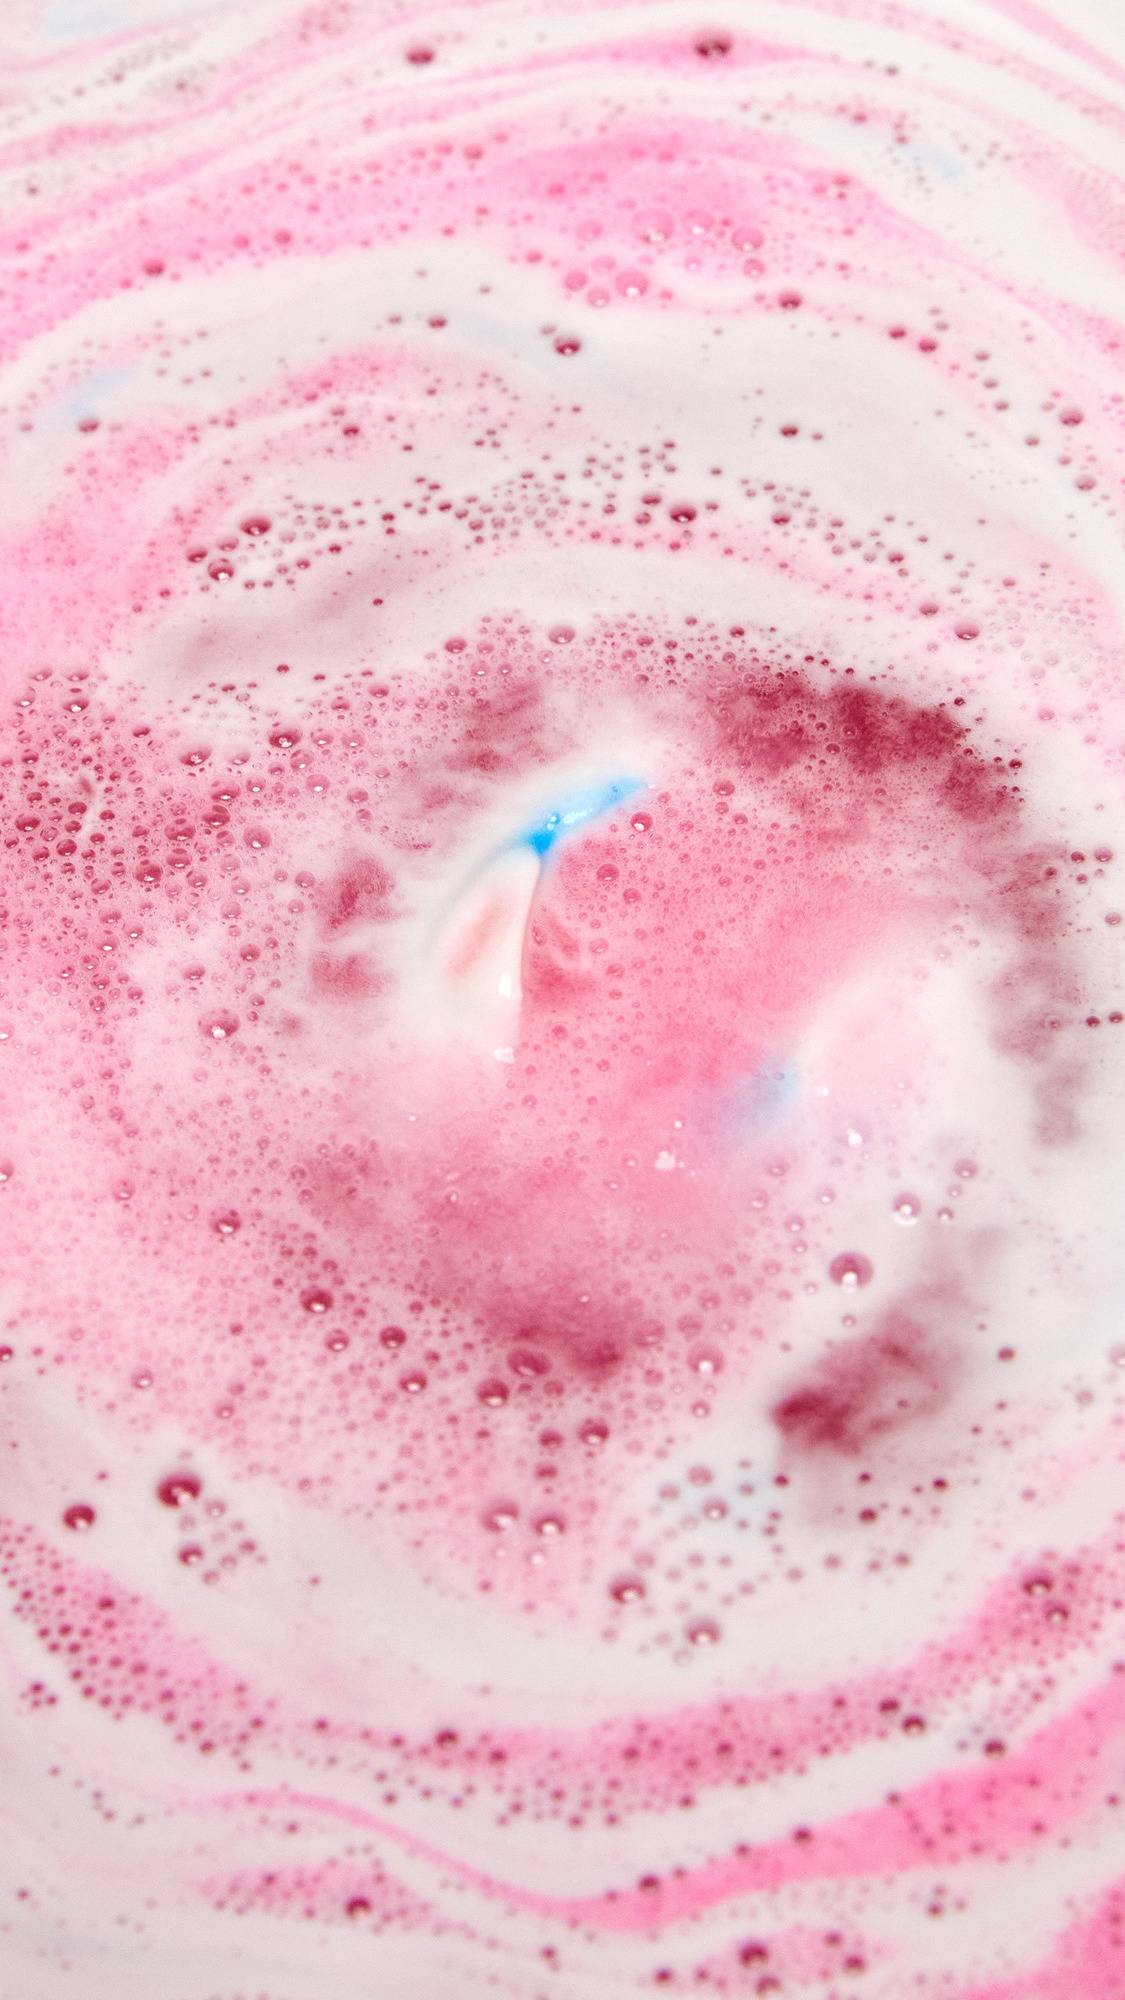 The American Cream bath bomb is slowly dissolving in the bath water giving off a pretty pink and white rippled foam across the surface with a small speck of blue in the centre.